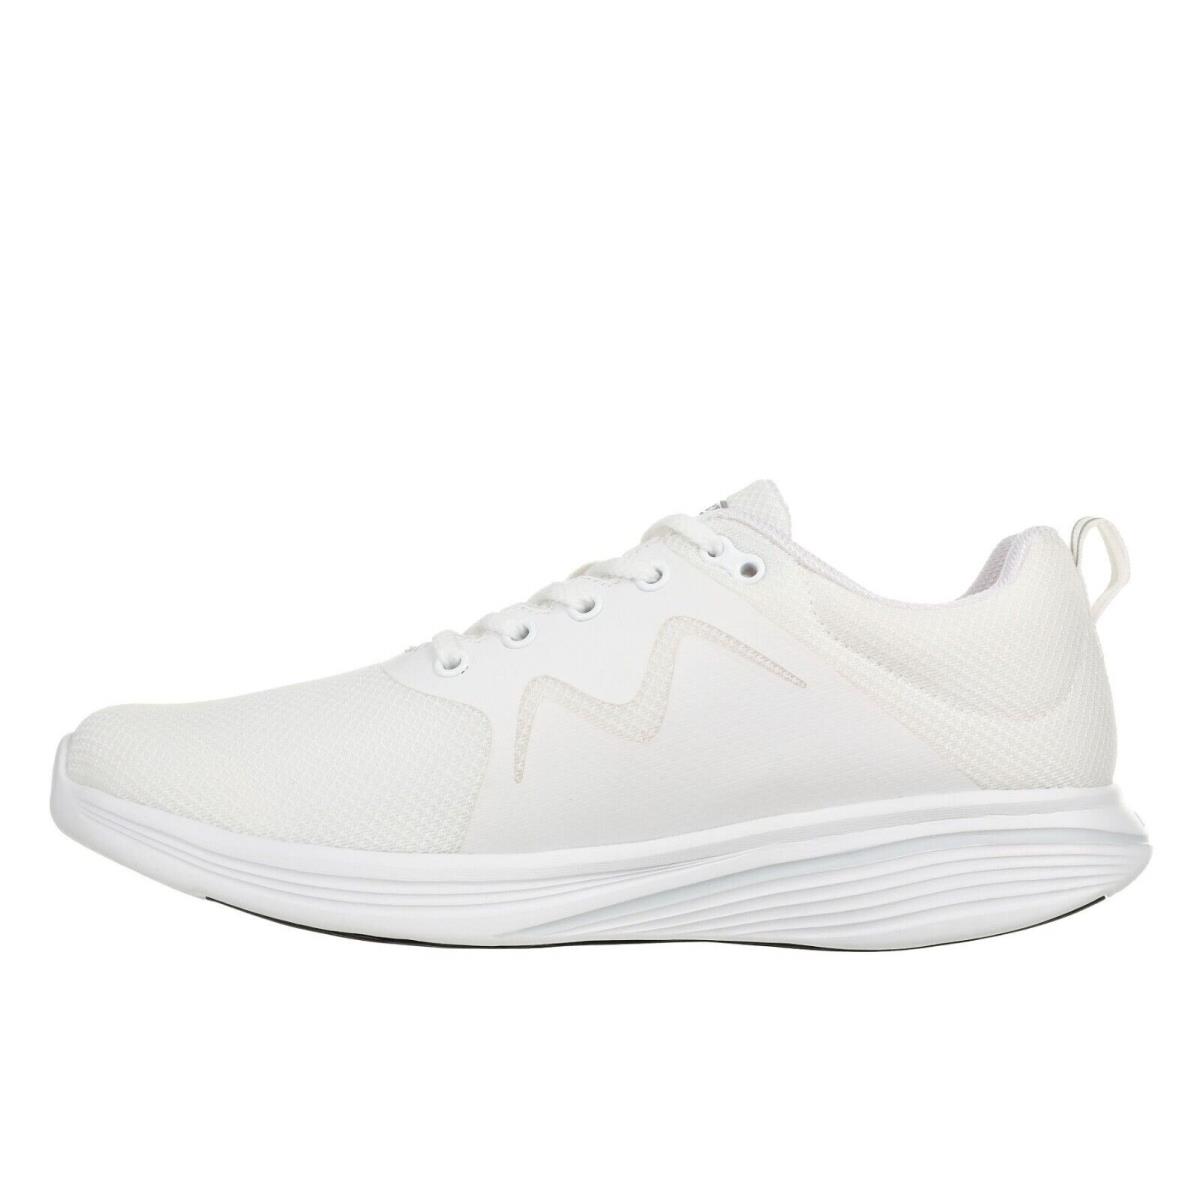 MBT shoes ACTIVE EVERYDAY WALKER - Yasu-White 5